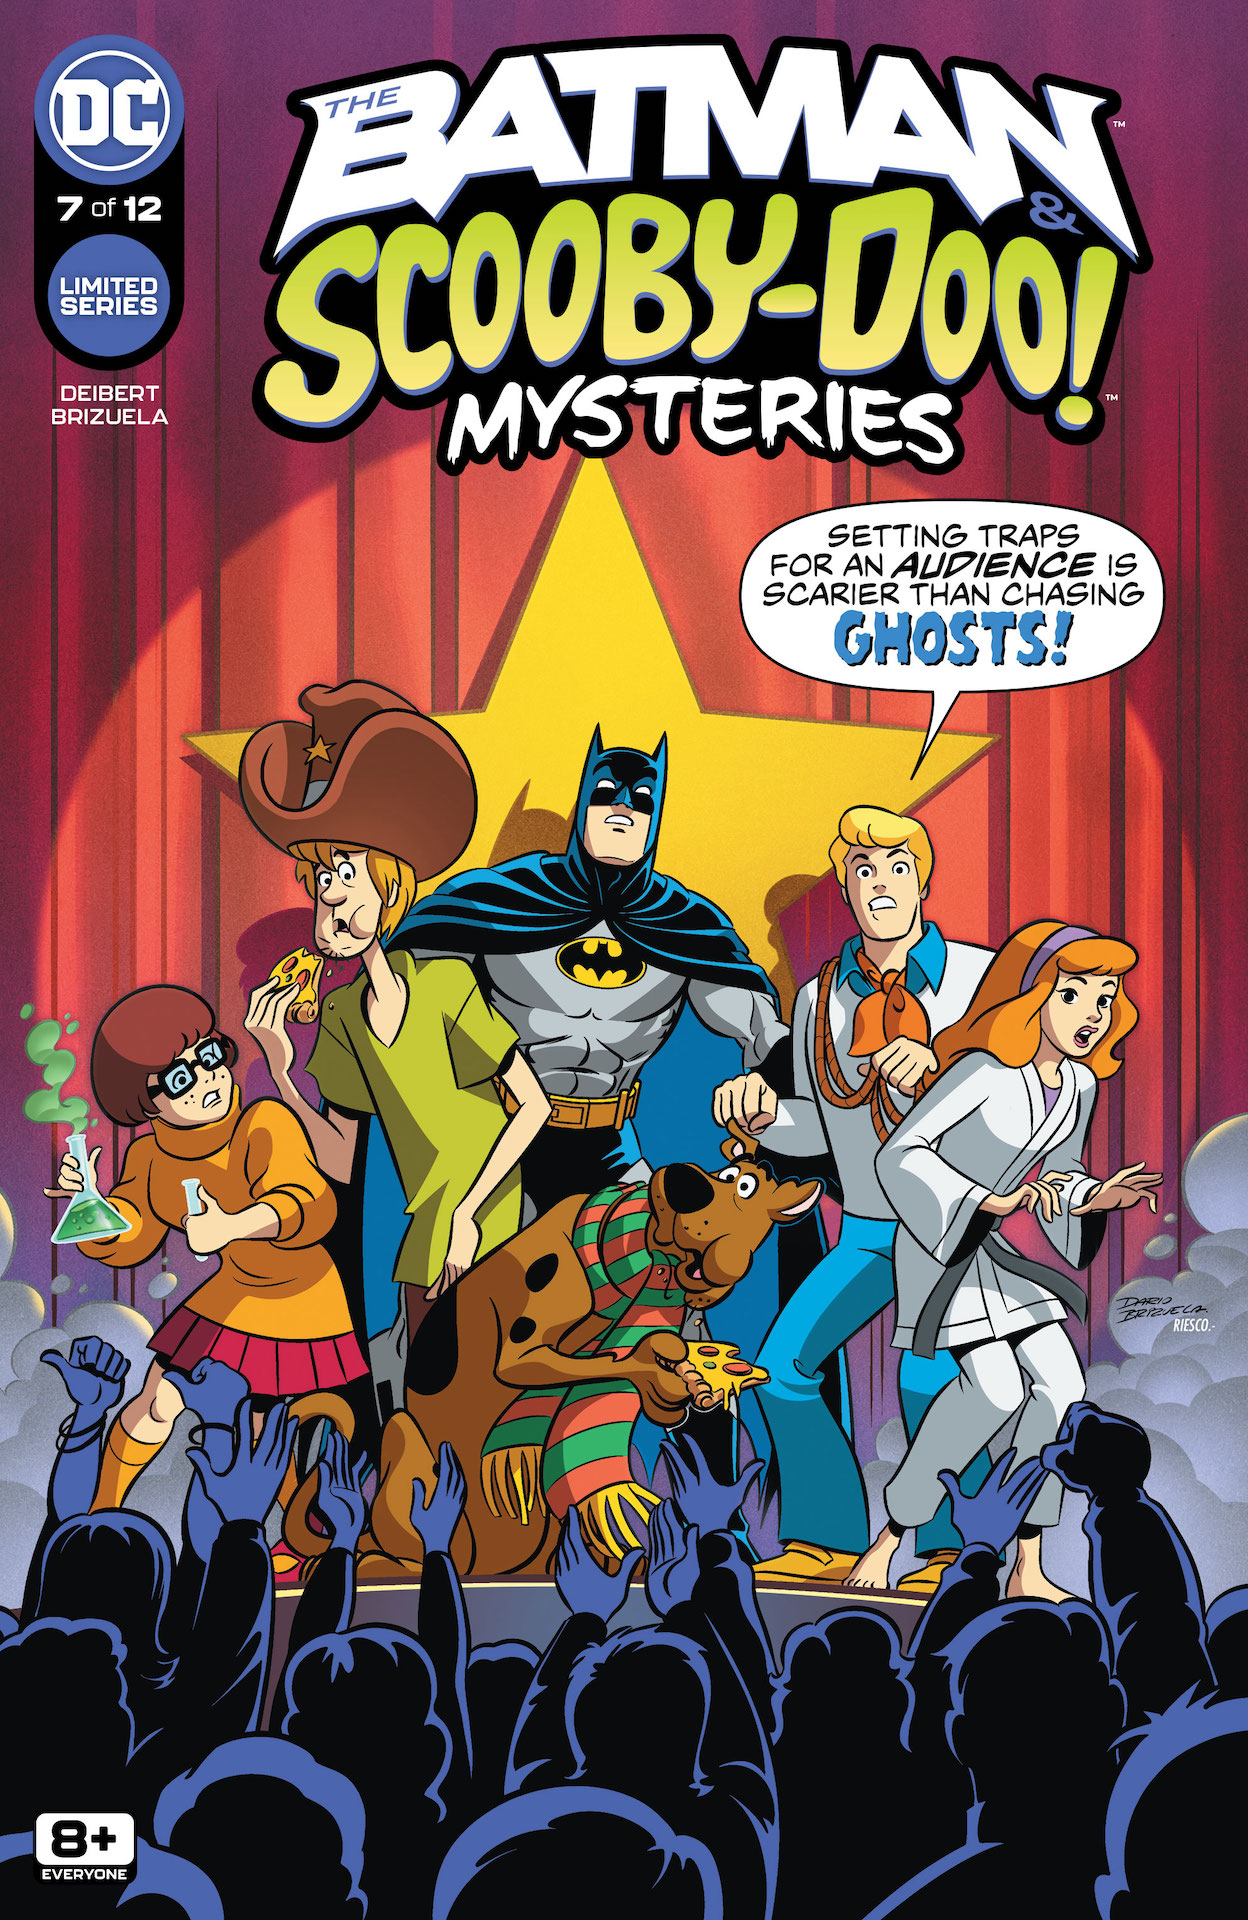 DC Preview: The Batman & Scooby-Doo Mysteries #7